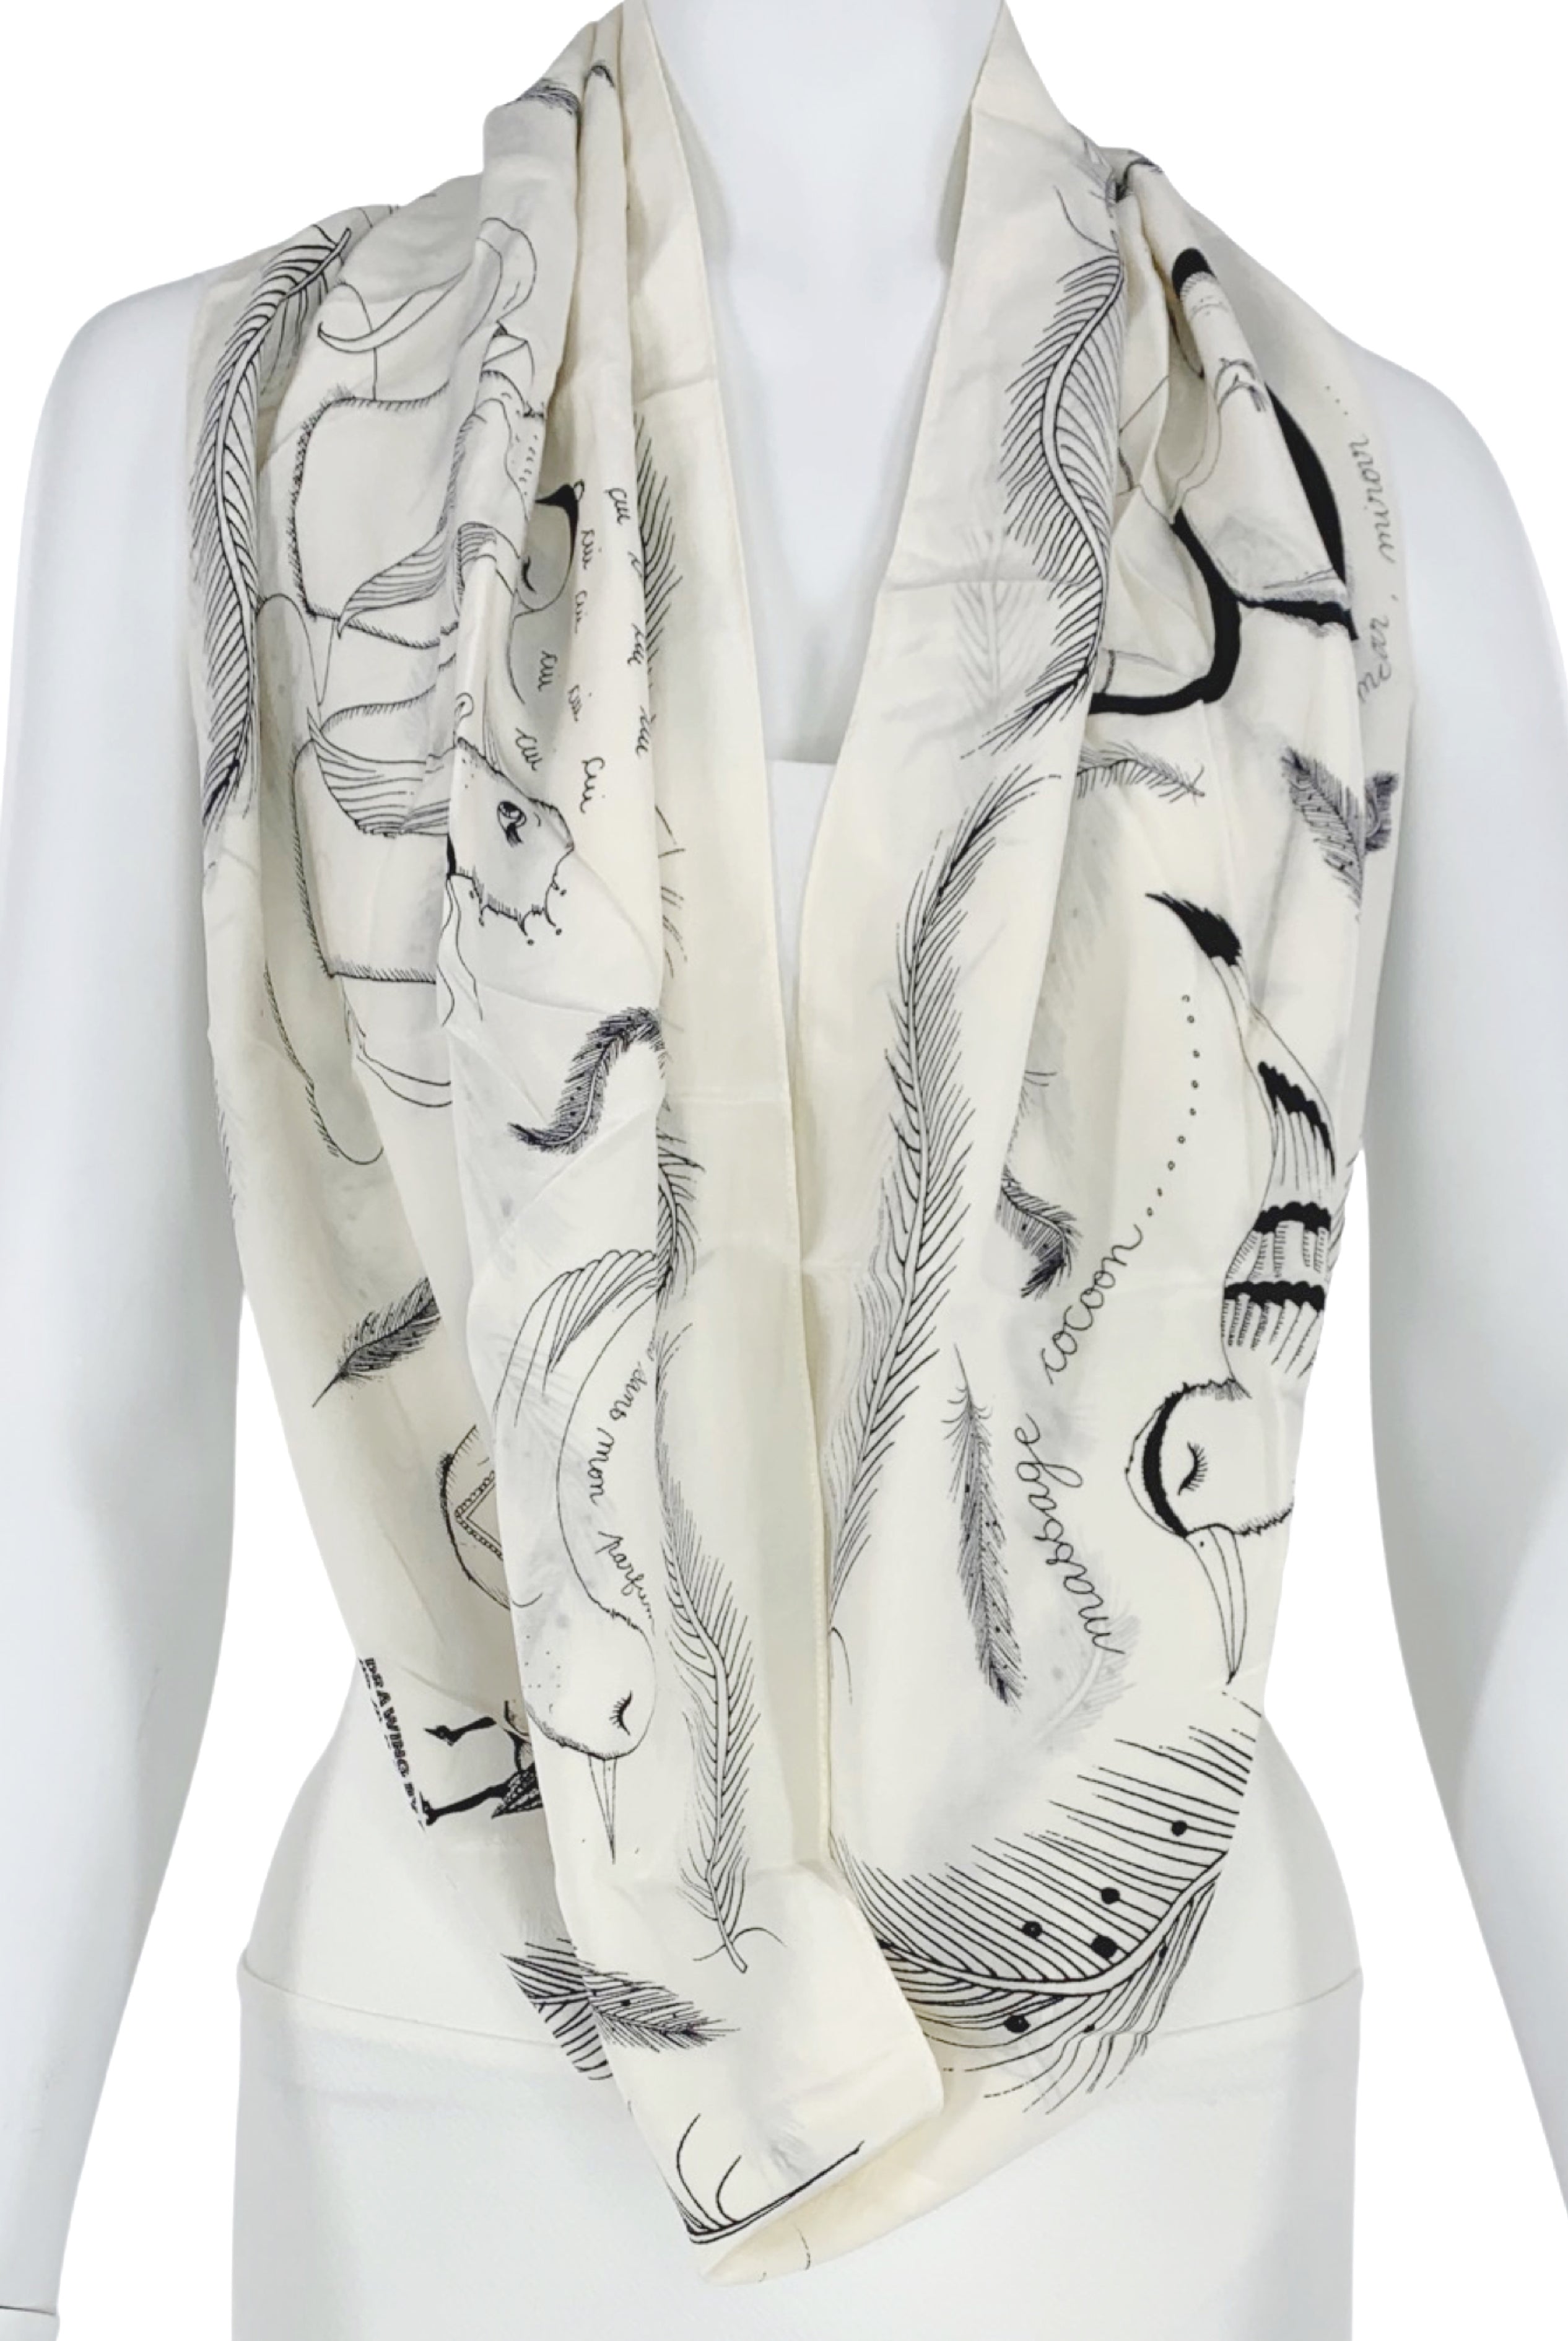 Florence Balducci Silk Infinity Scarf - Front view